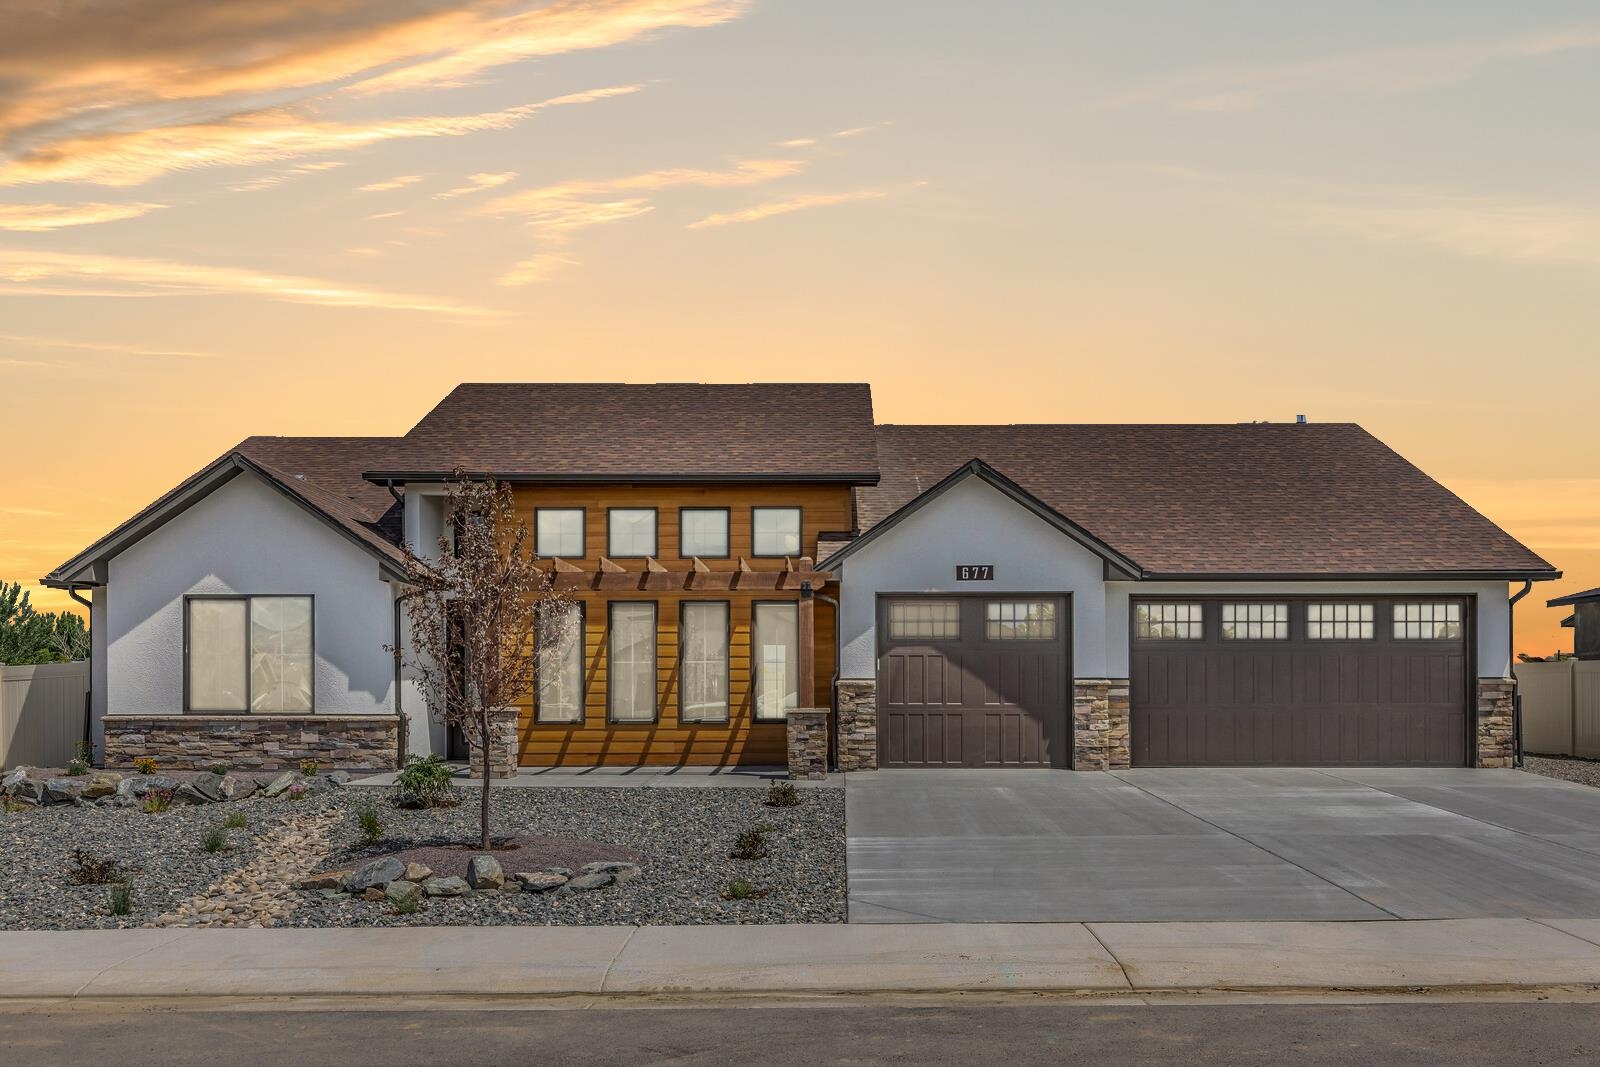 An abundance of adjectives will pop into your head when you explore Dahl Built Homes latest new build - "Ordinary" isn't one of them! This AMAZING home is in Fruita’s, Orchard Ridge community. The exterior is a blend of farmhouse and traditional elements. Inside, the main area presents plenty of natural light coupled with the 10' ceiling in the kitchen and 14' ceiling in the living room. The master bedroom is spacious, and the master closet is connected to the laundry room creating a convenient layout. The secondary bedrooms feature a J & J bath and a separate bath for the 4th bedroom adding a level of privacy. The outside offers RV parking and backyard has great patio space with custom fire pit built for entertaining. Come see what all the excitement is about!